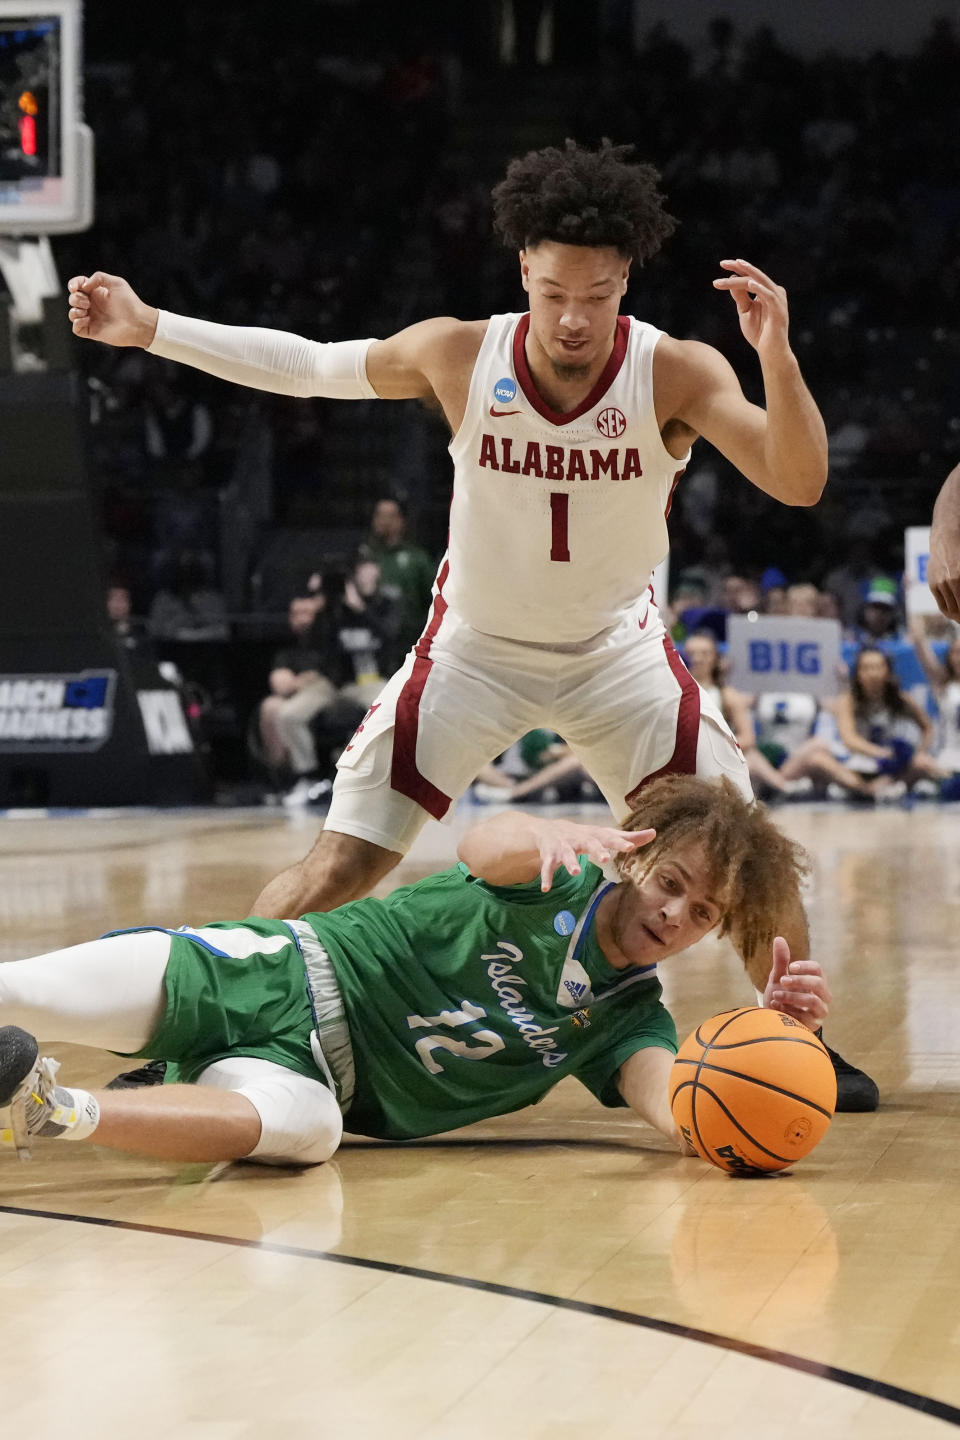 Texas A&M Corpus Christi forward Owen Dease (12) reaches for the ball while Alabama guard Mark Sears (1) defends in the first half of a first-round college basketball game in the NCAA Tournament in Birmingham, Ala., Thursday, March 16, 2023. (AP Photo/Rogelio V. Solis)